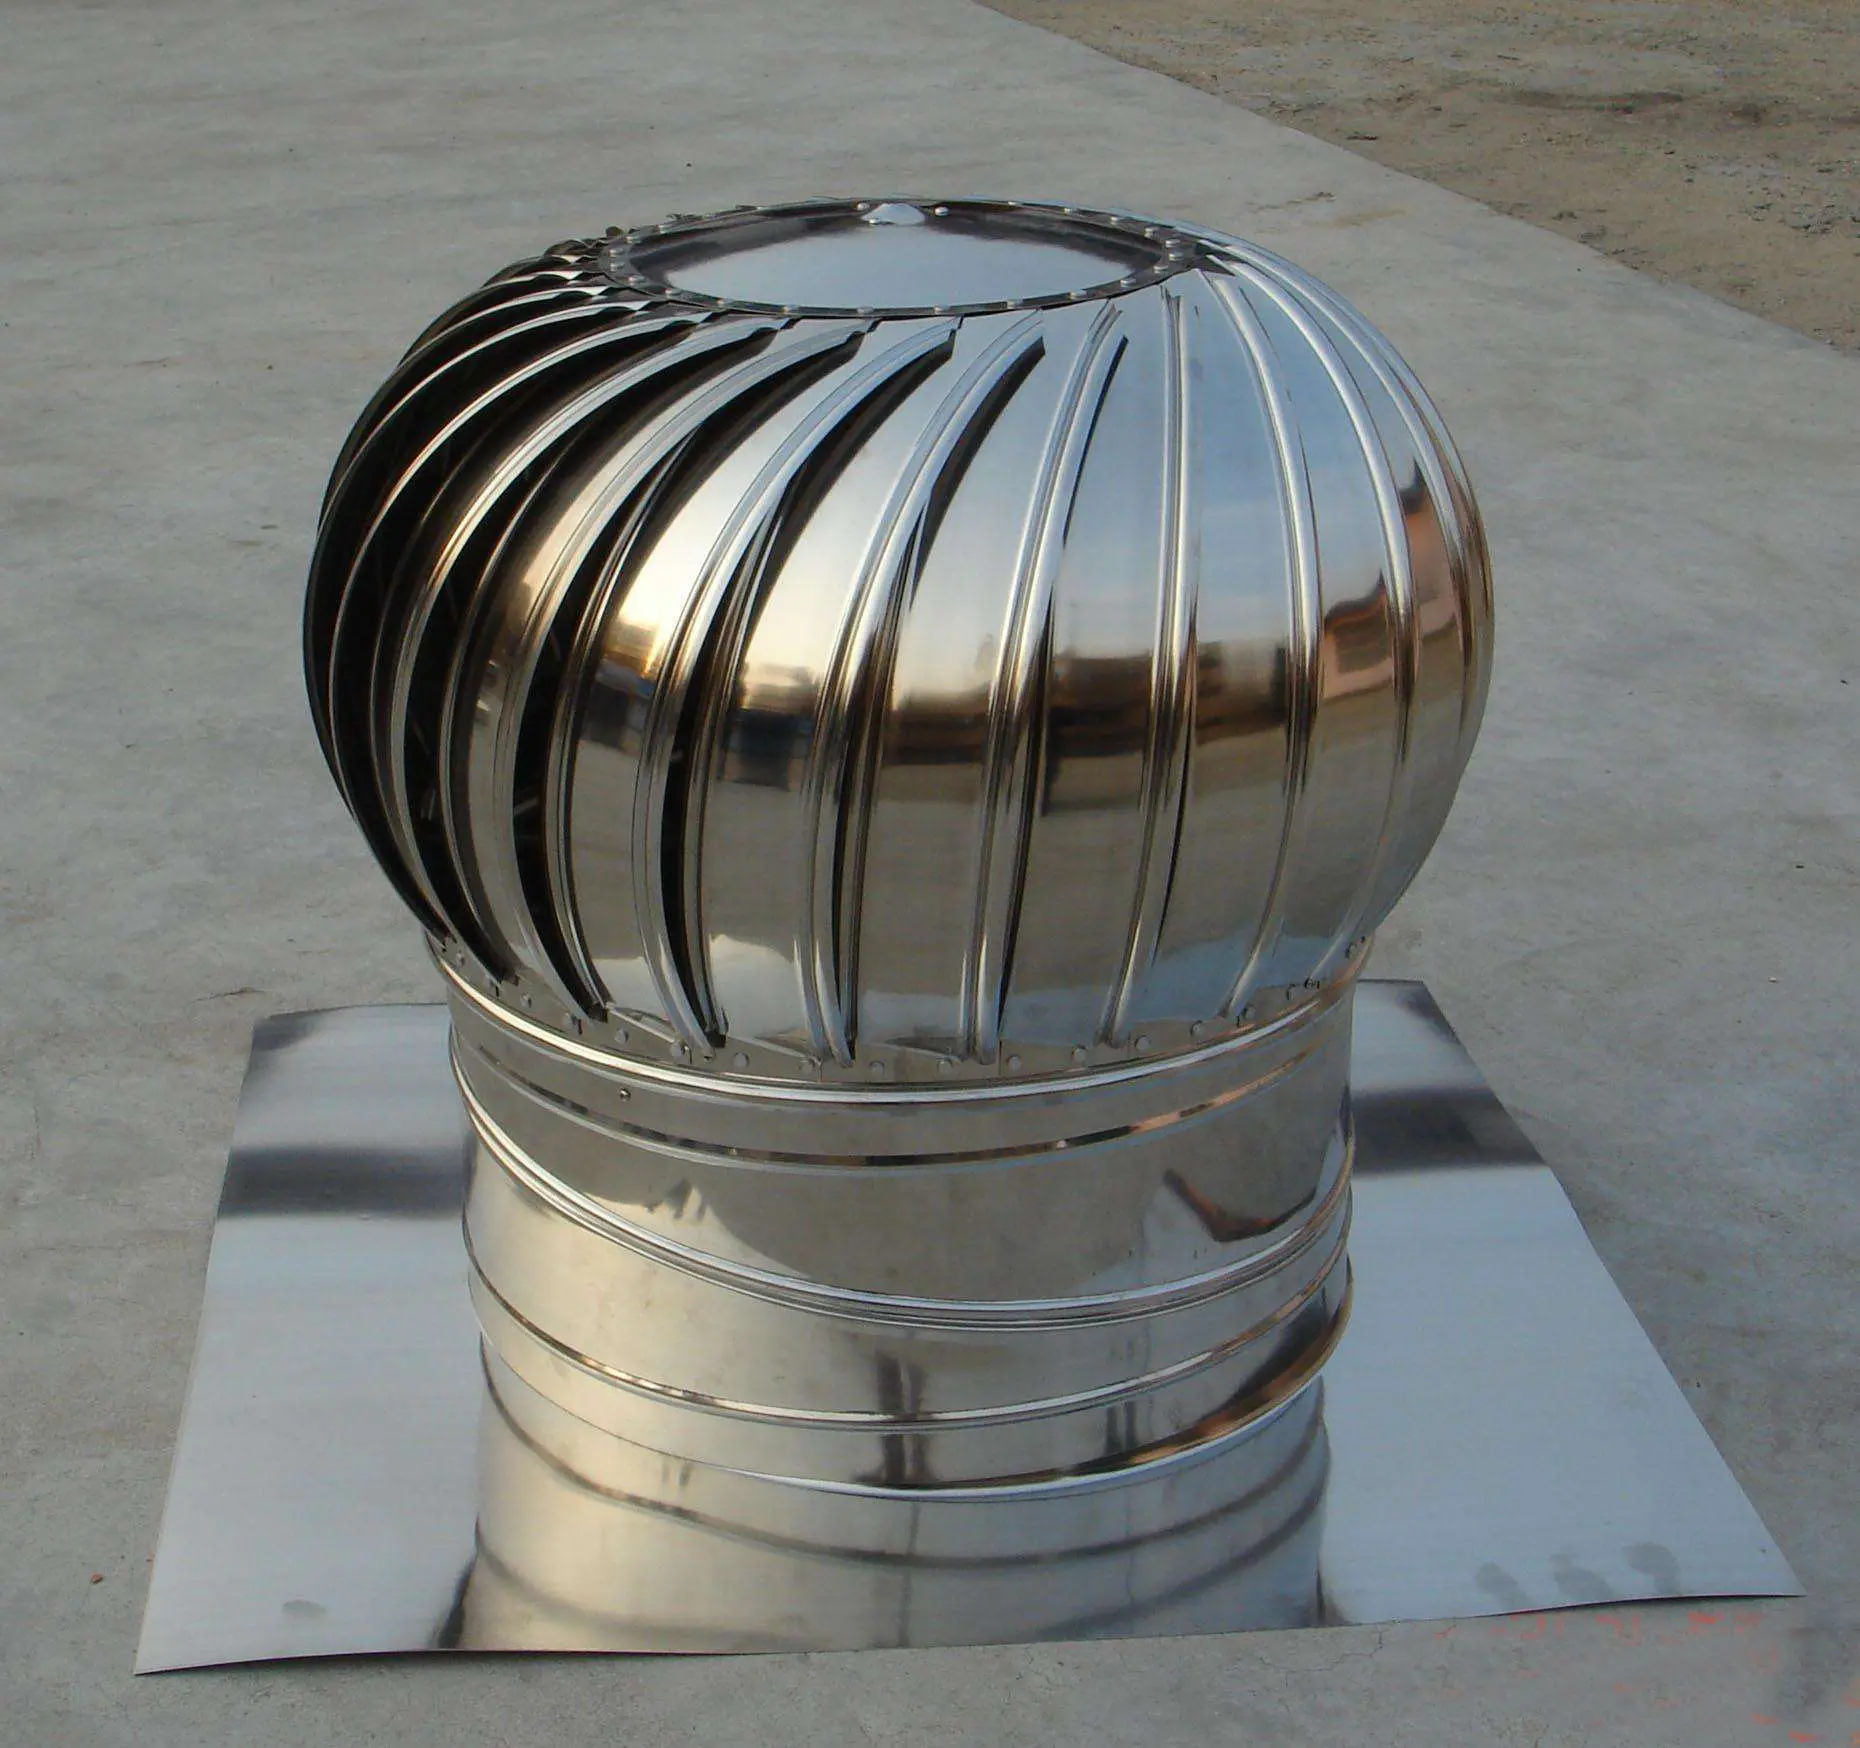 Chimney Mushroom Industrial Super Speed Strong Suction Wind Turbine Air Ventilation Roof Air Mounted Exhaust Fan